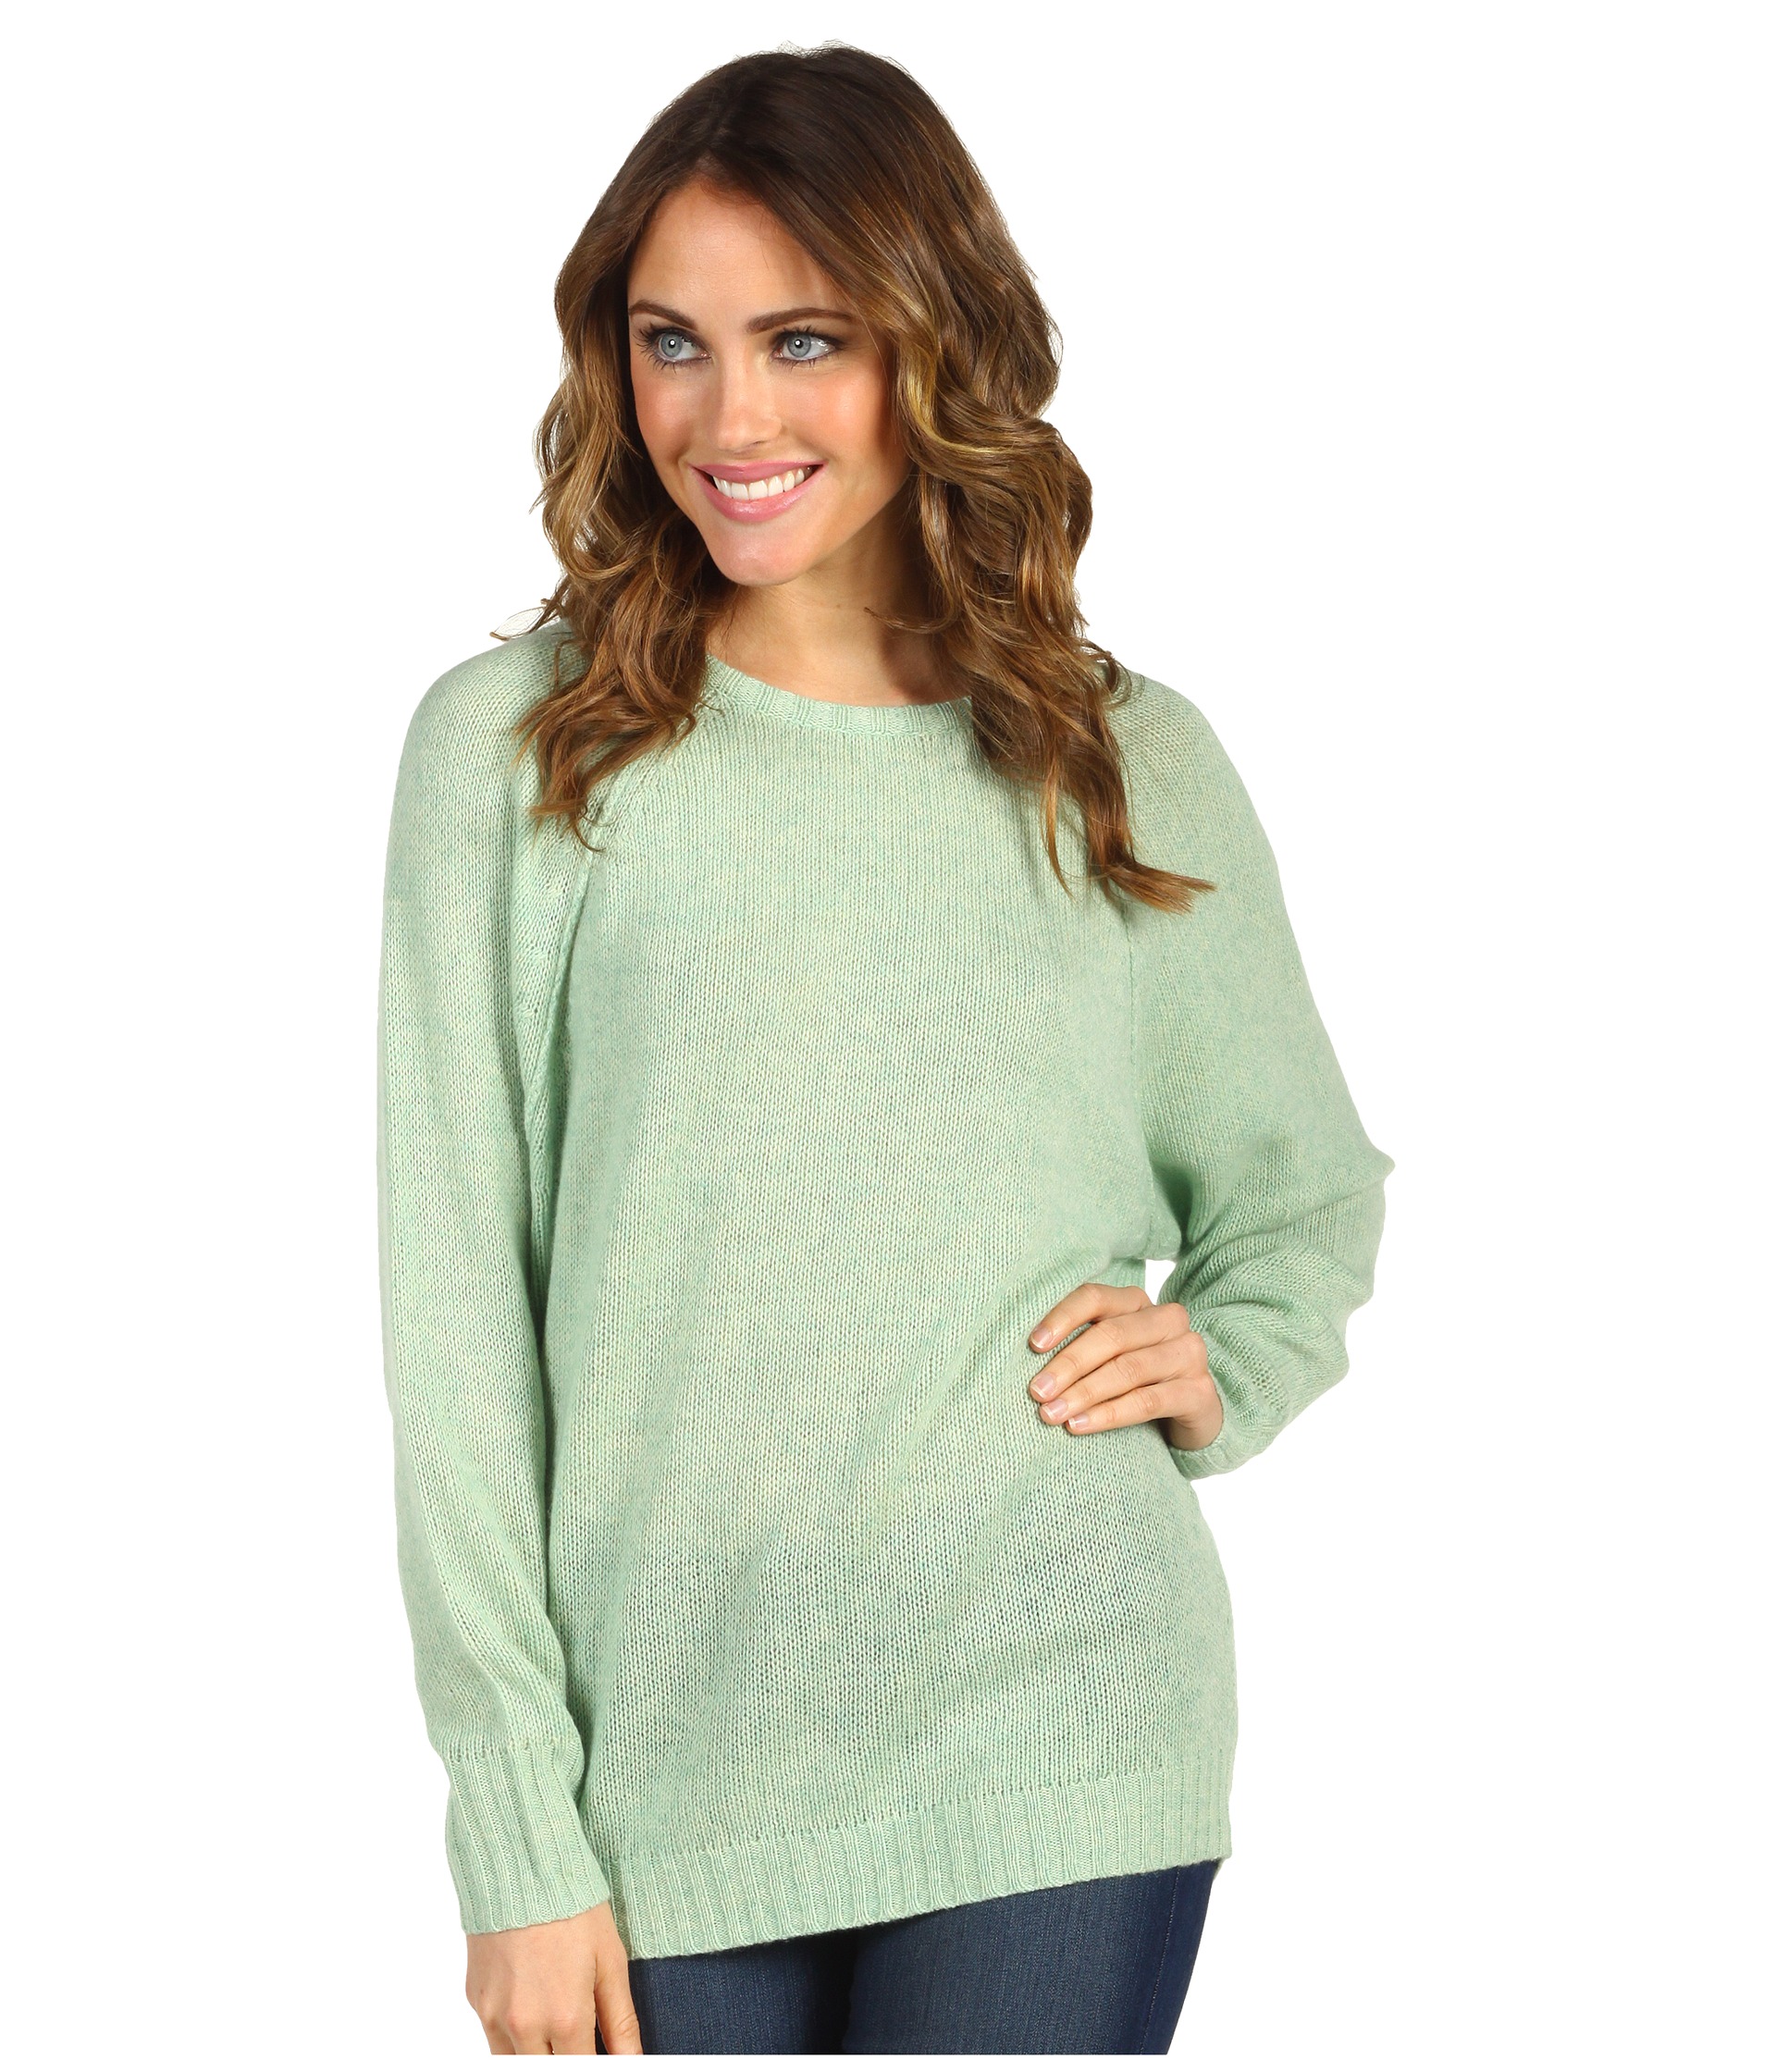   123.00  Autumn Cashmere Relaxed Fit Sweatshirt $275.00